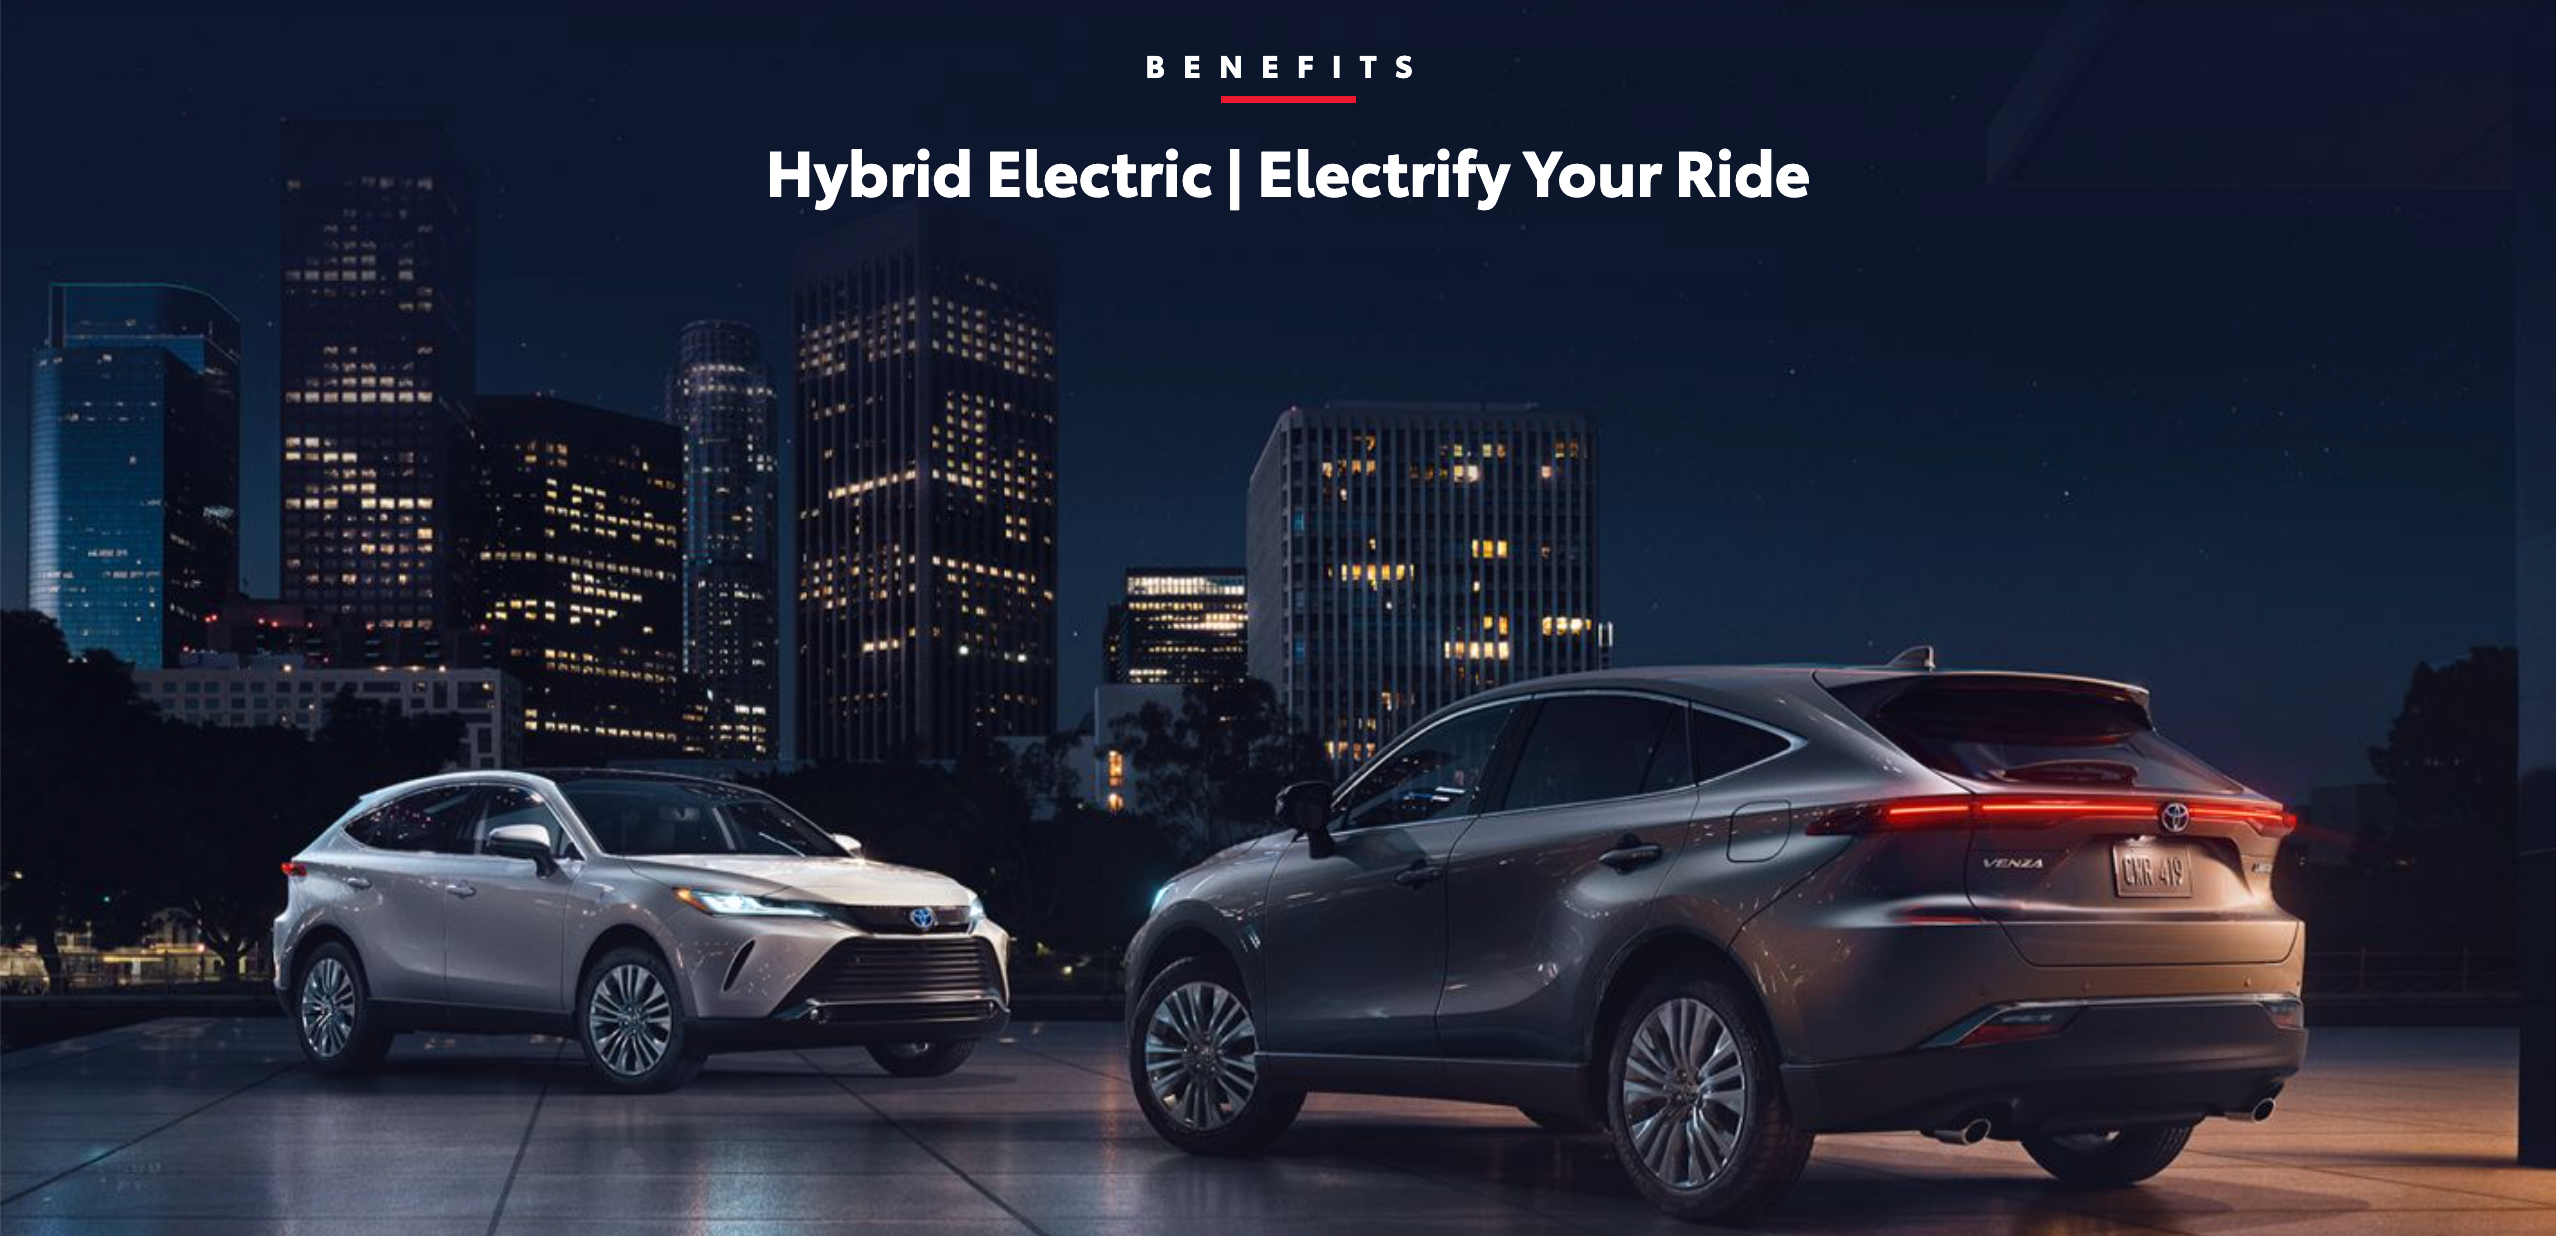 Benefits of having a hybrid electric vehicle. Electrify your ride. Two Toyotas facing each other with city skyline background.